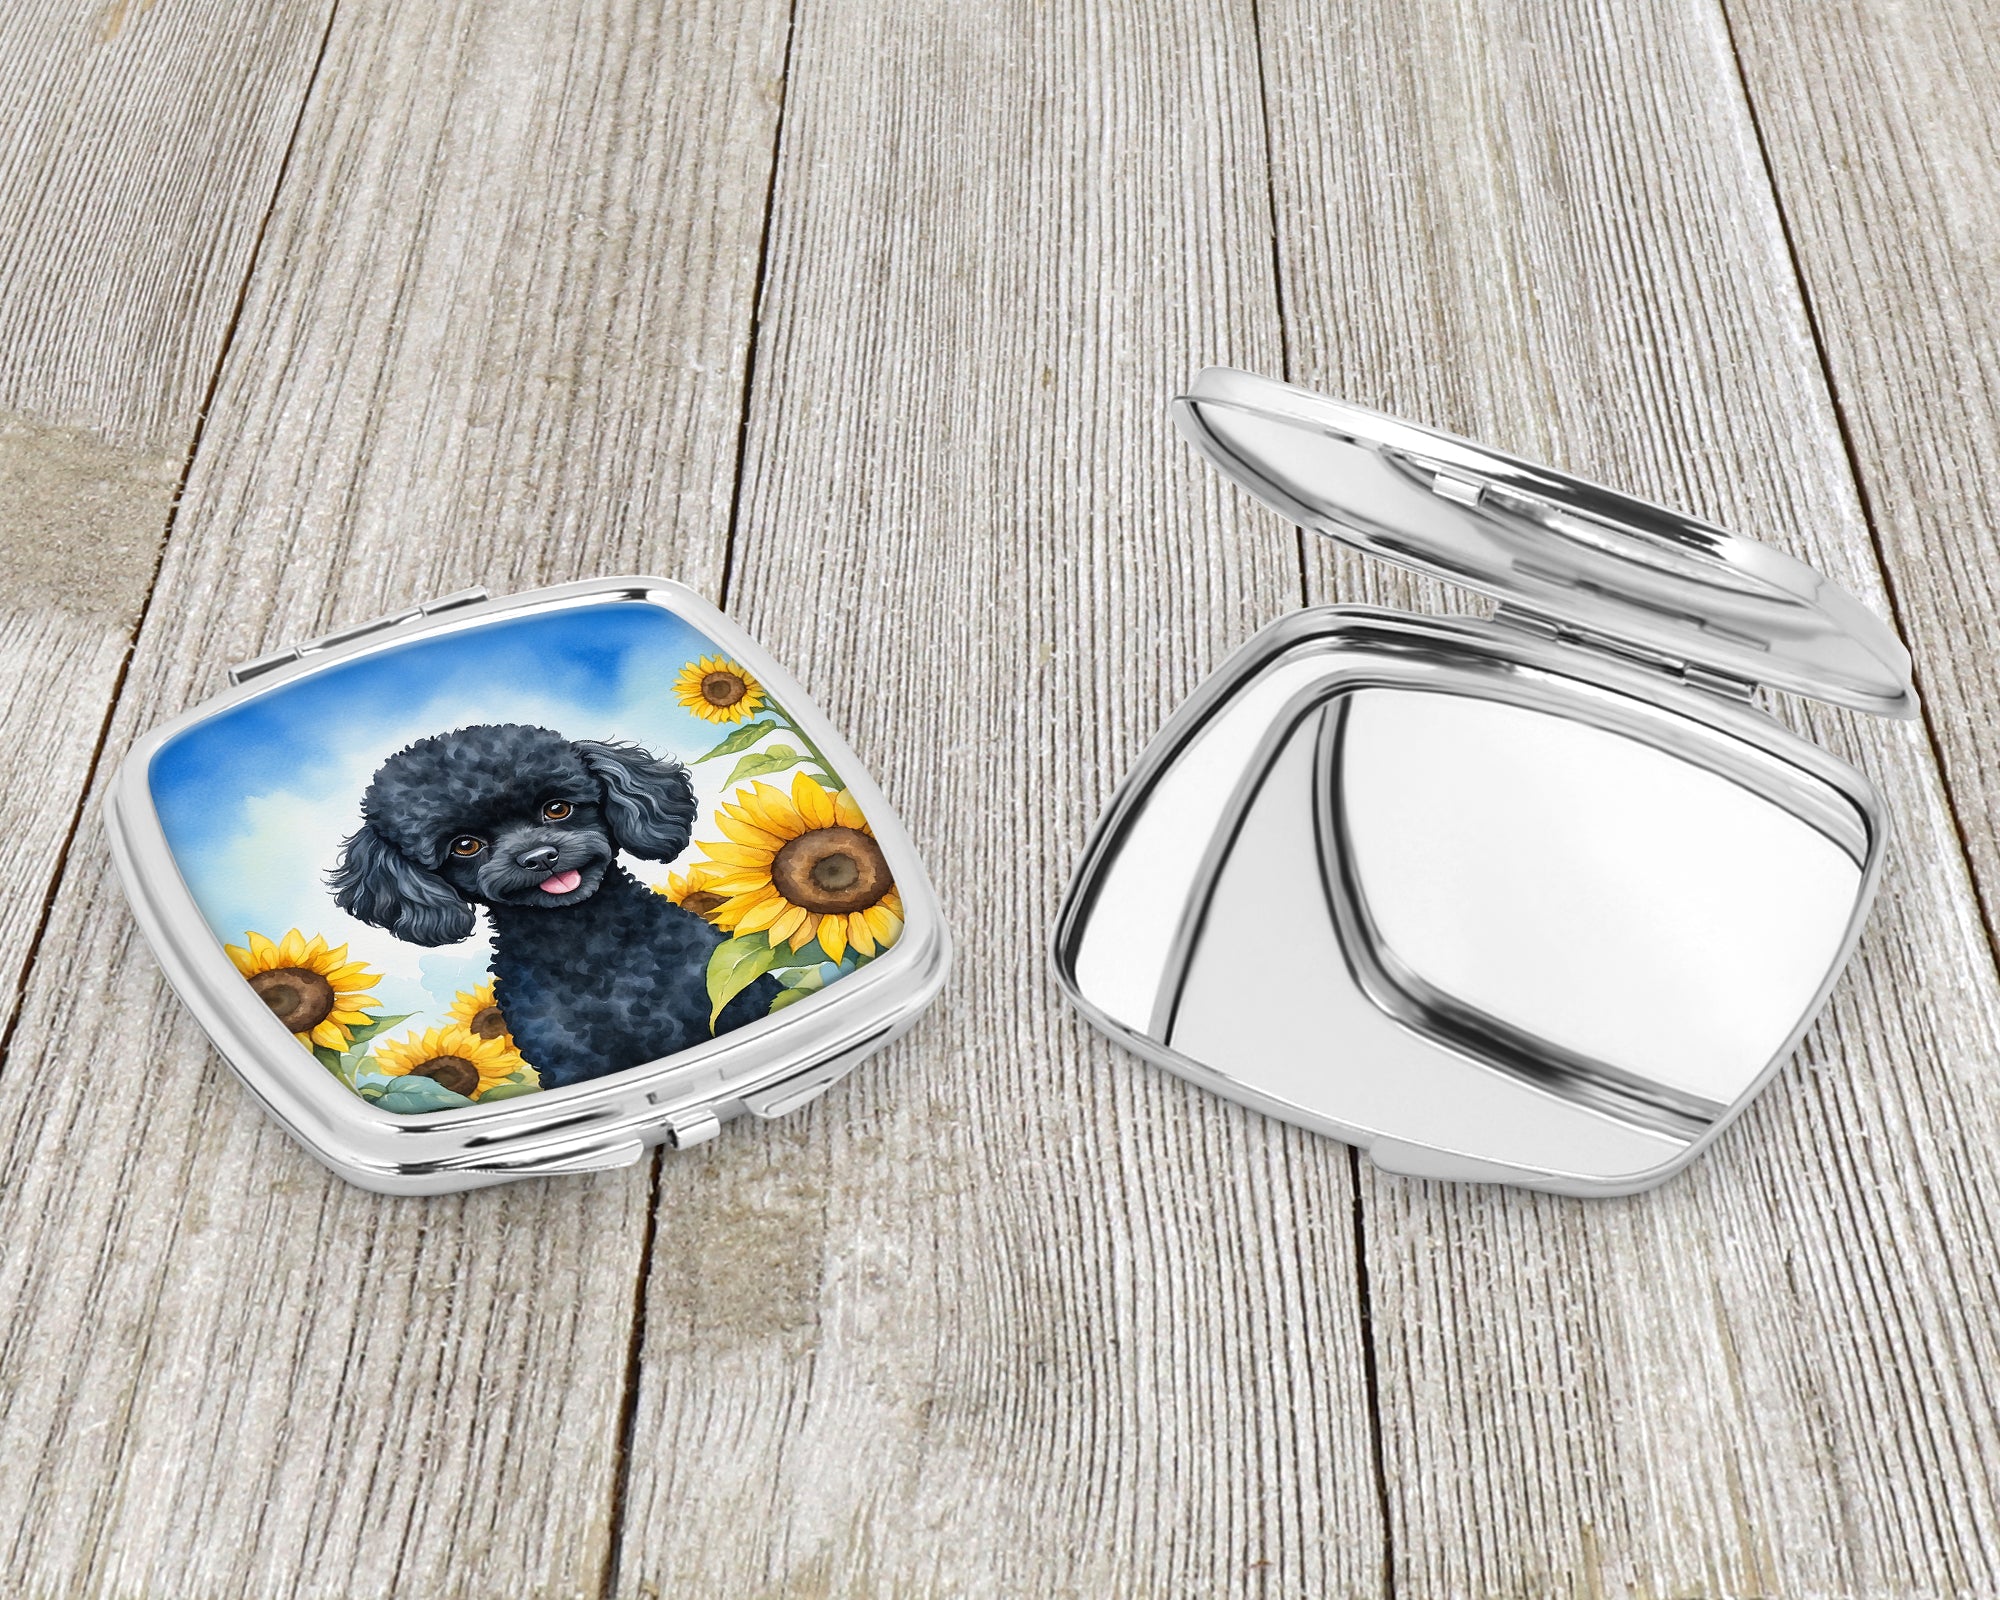 Black Poodle in Sunflowers Compact Mirror